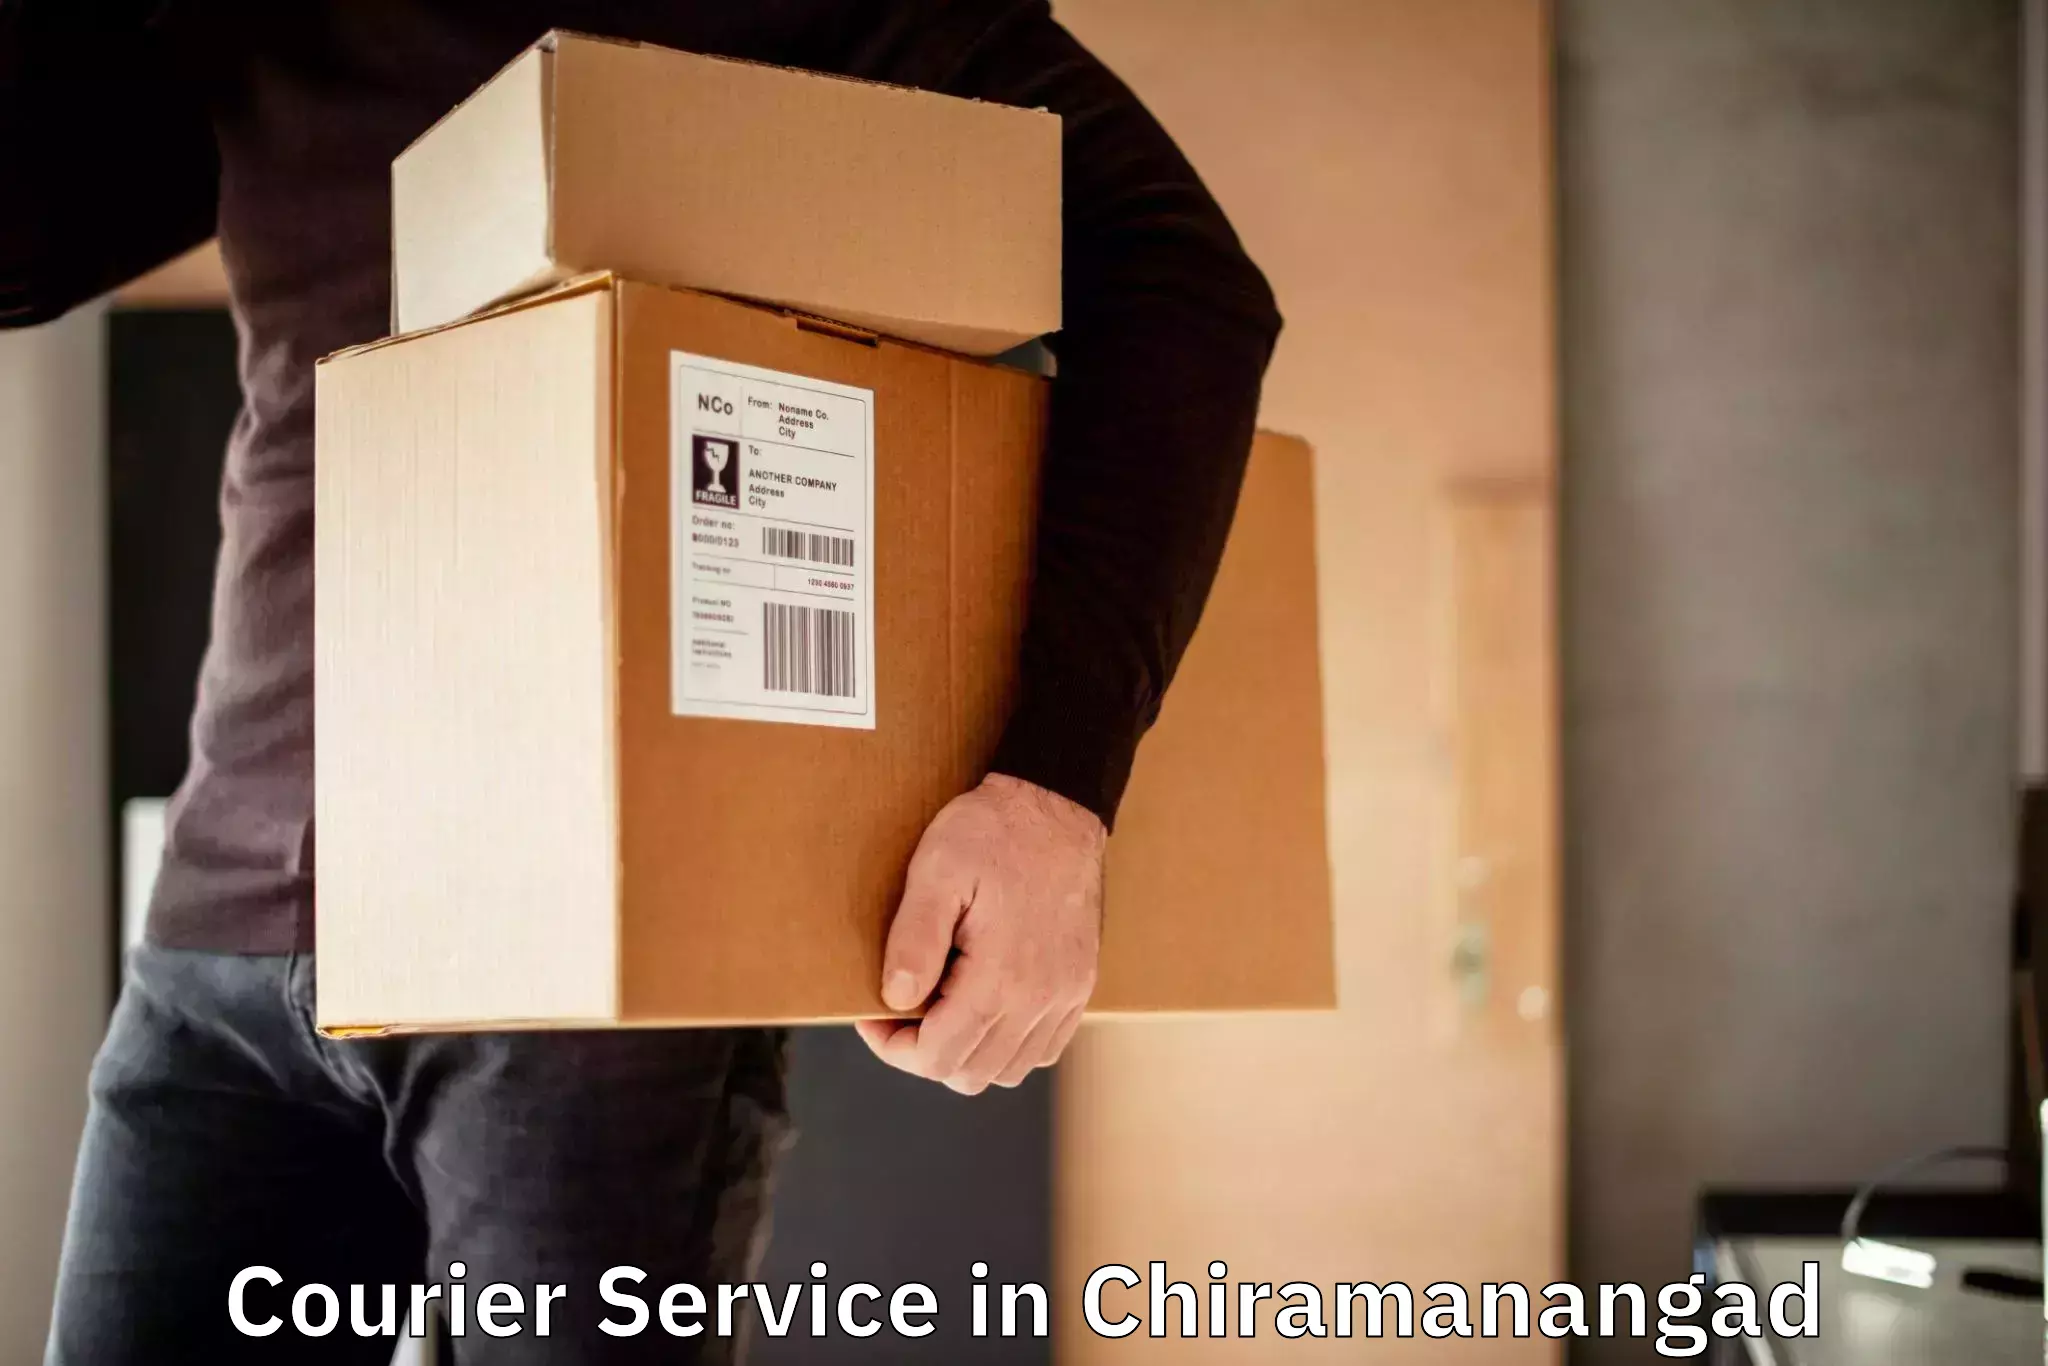 24-hour courier service in Chiramanangad